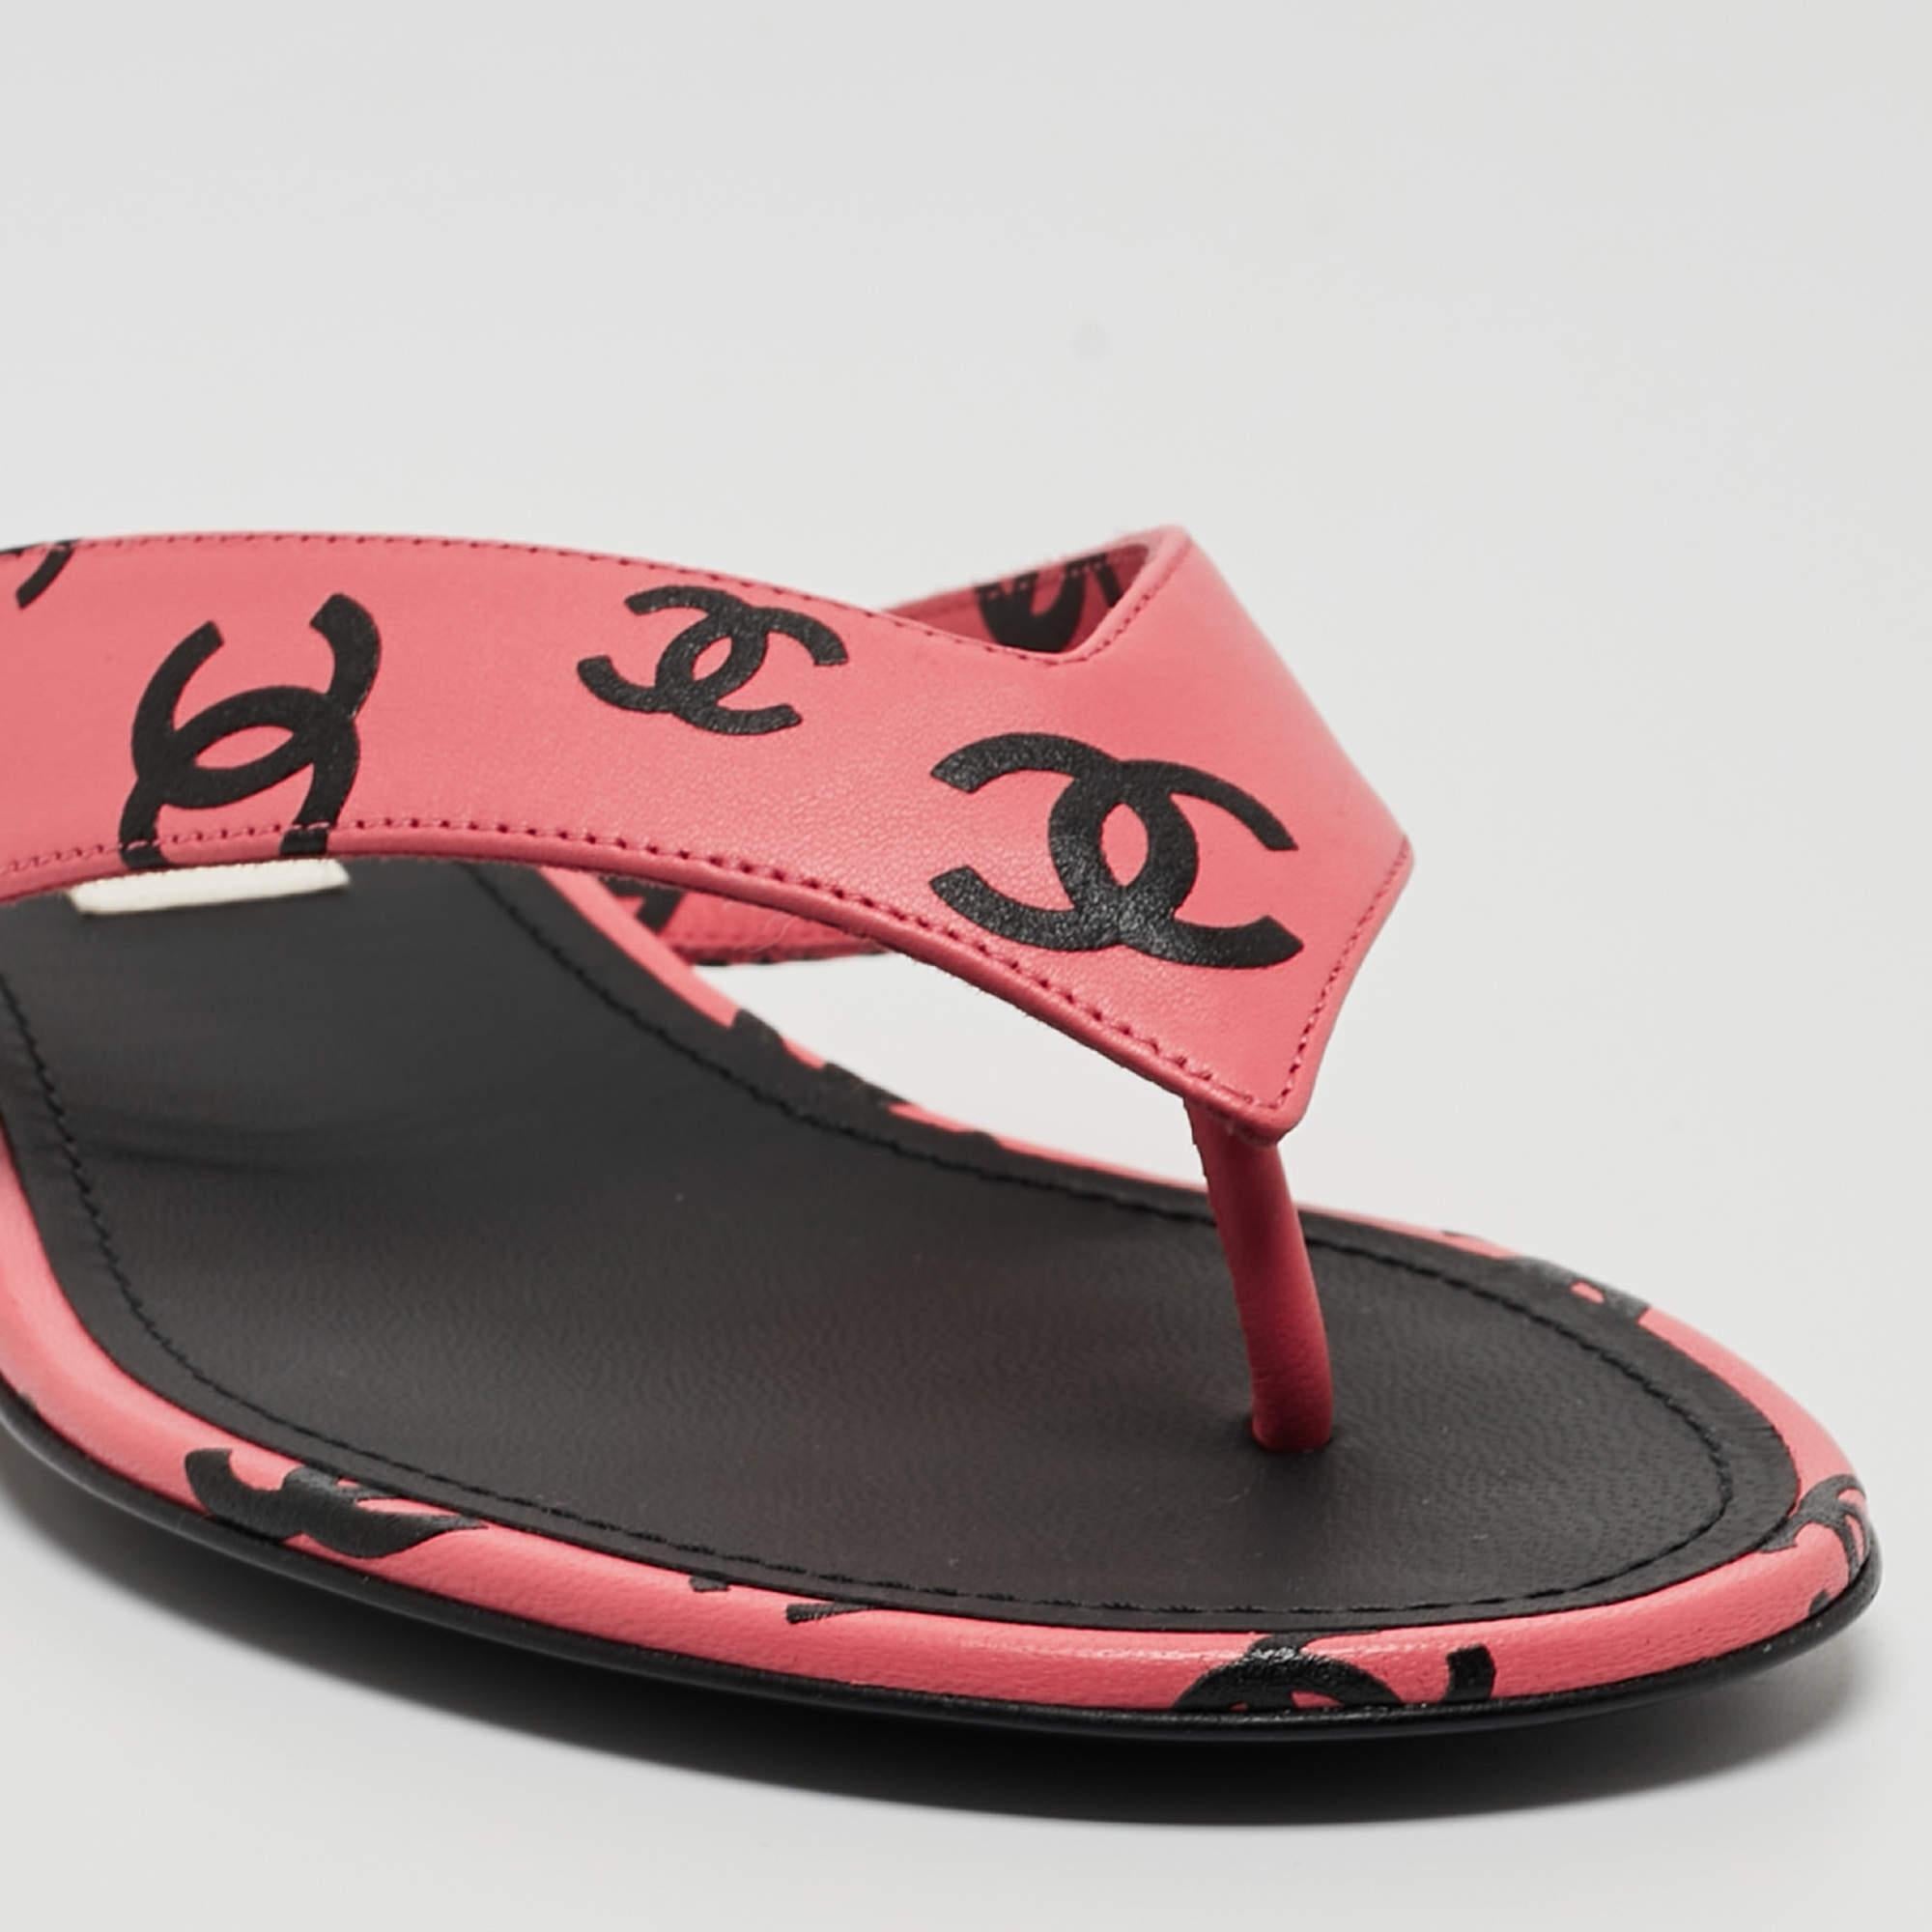 Chanel Pink/Black CC Print Leather Thong Sandals Size 36 1